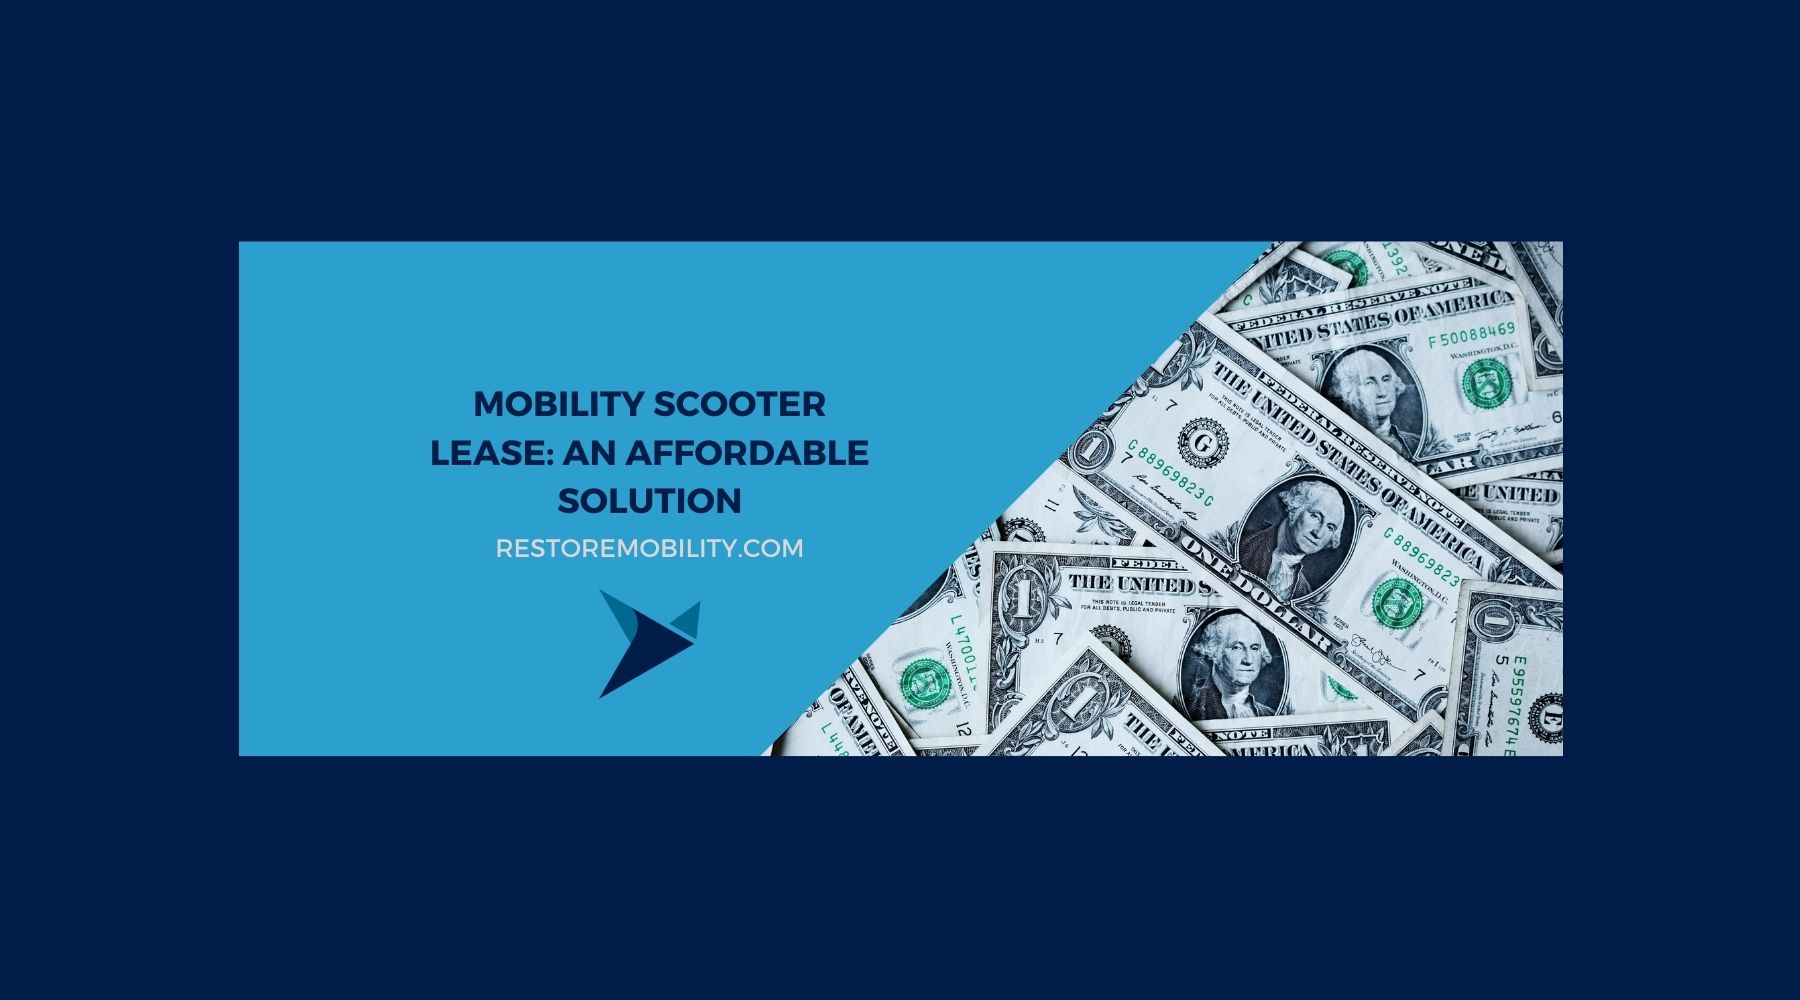 Mobility Scooter Lease: An Affordable Solution